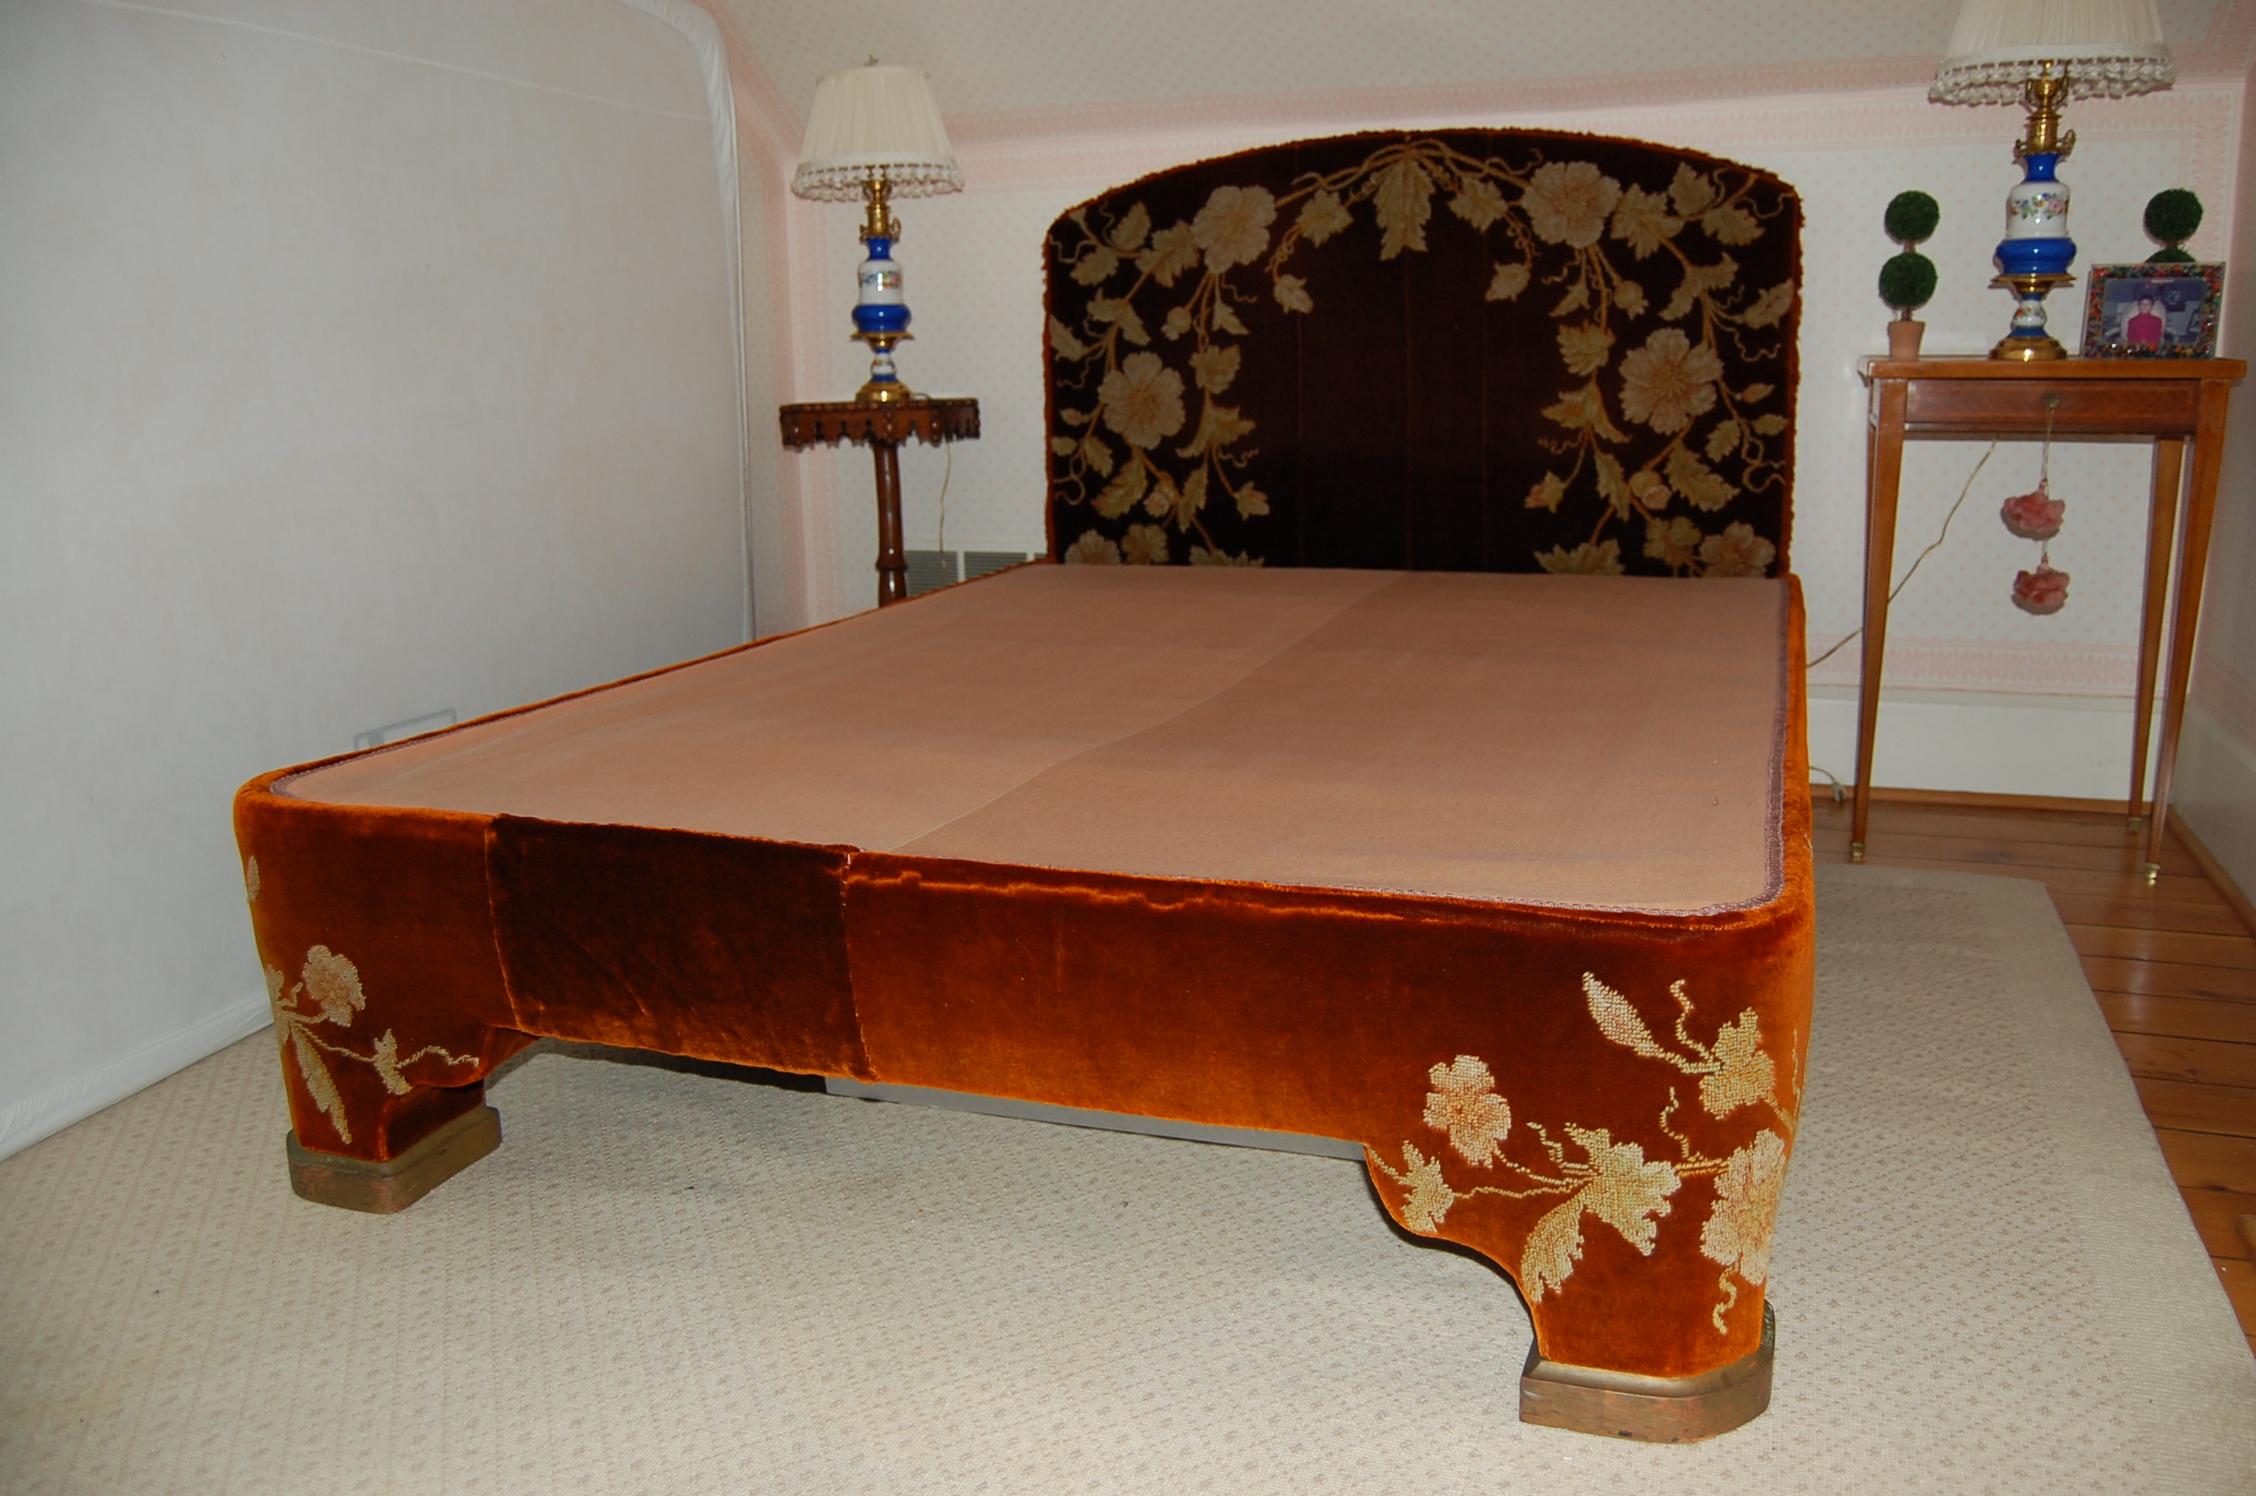 This bed was constructed in the late 1970s and covered in antique embroidered cut velvet Mohair panels (Portiere in Louis' grandmothers home) circa 1925, accepts a full size mattress as shown. The headboard mounts using screws, the platform base is